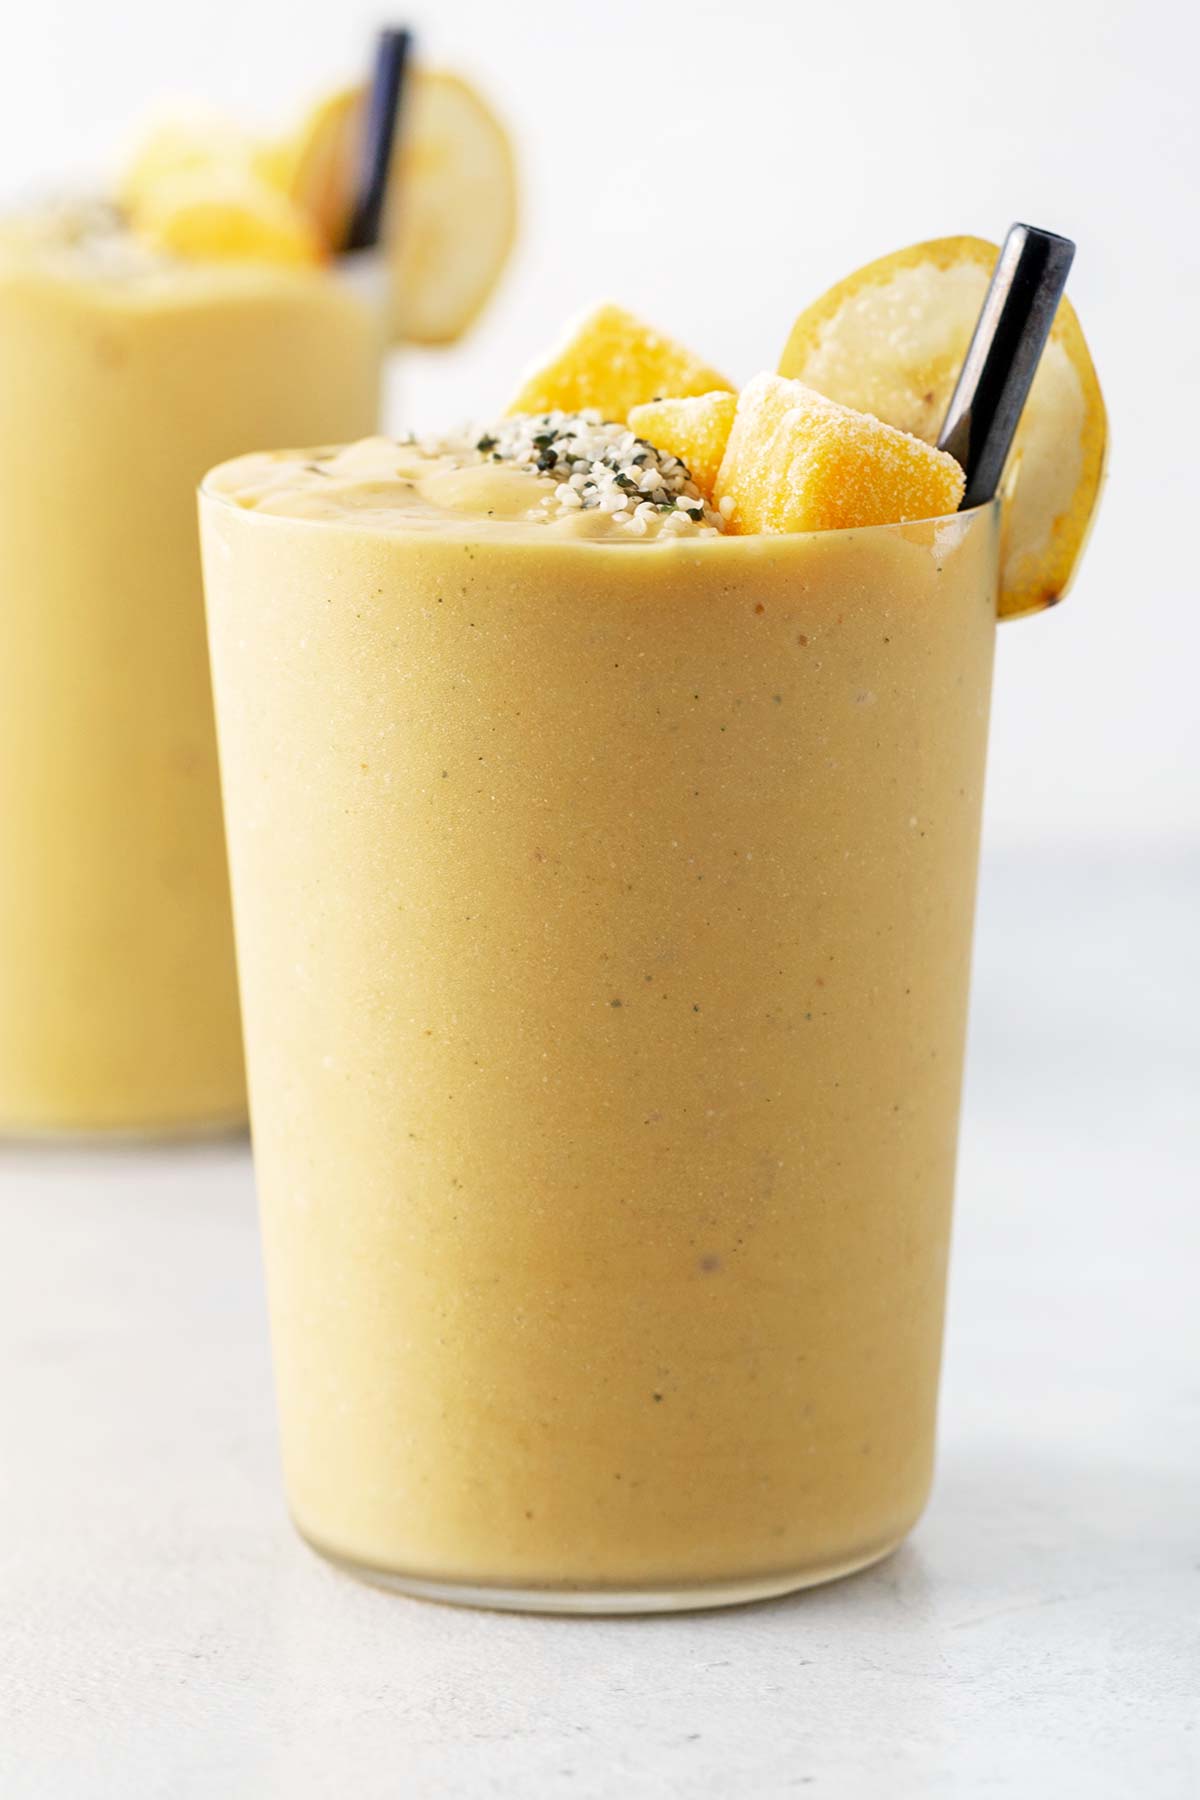 Mango smoothie in a glass.